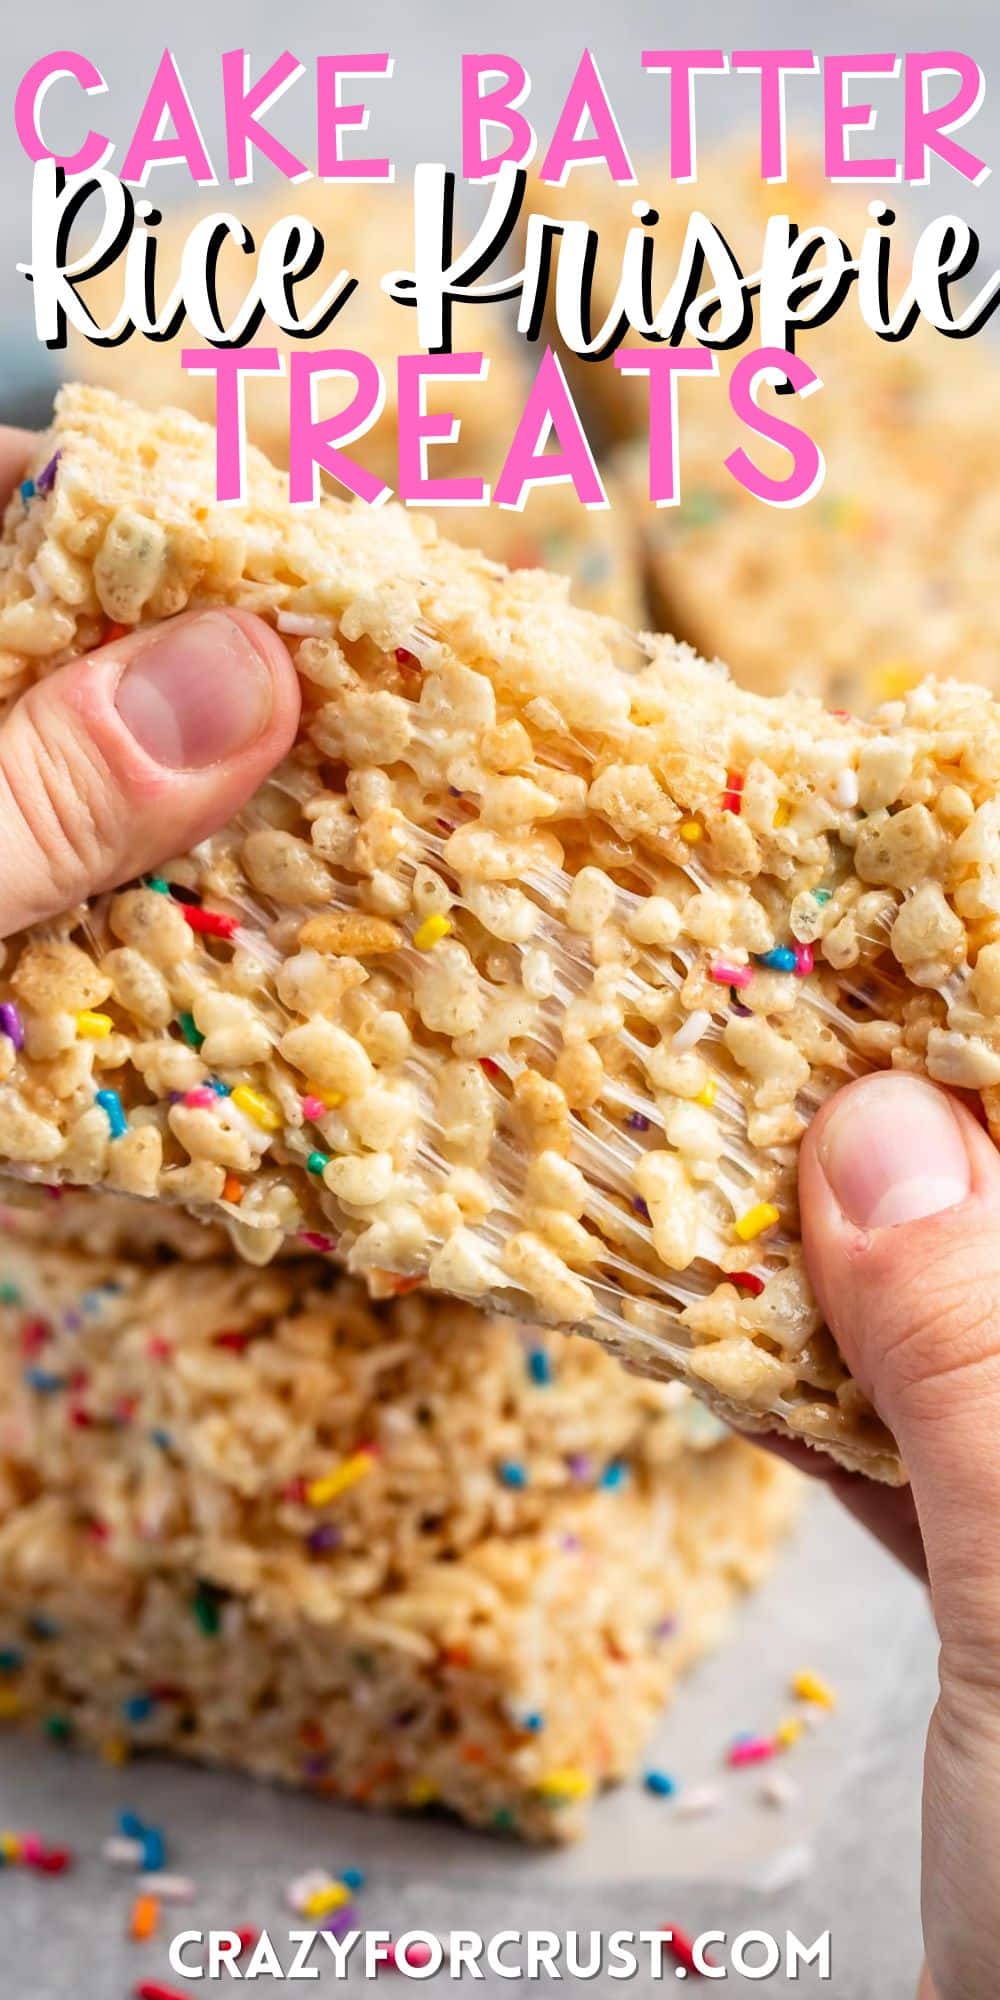 hand holding Rice Krispie treats with sprinkles baked in with words on the image.